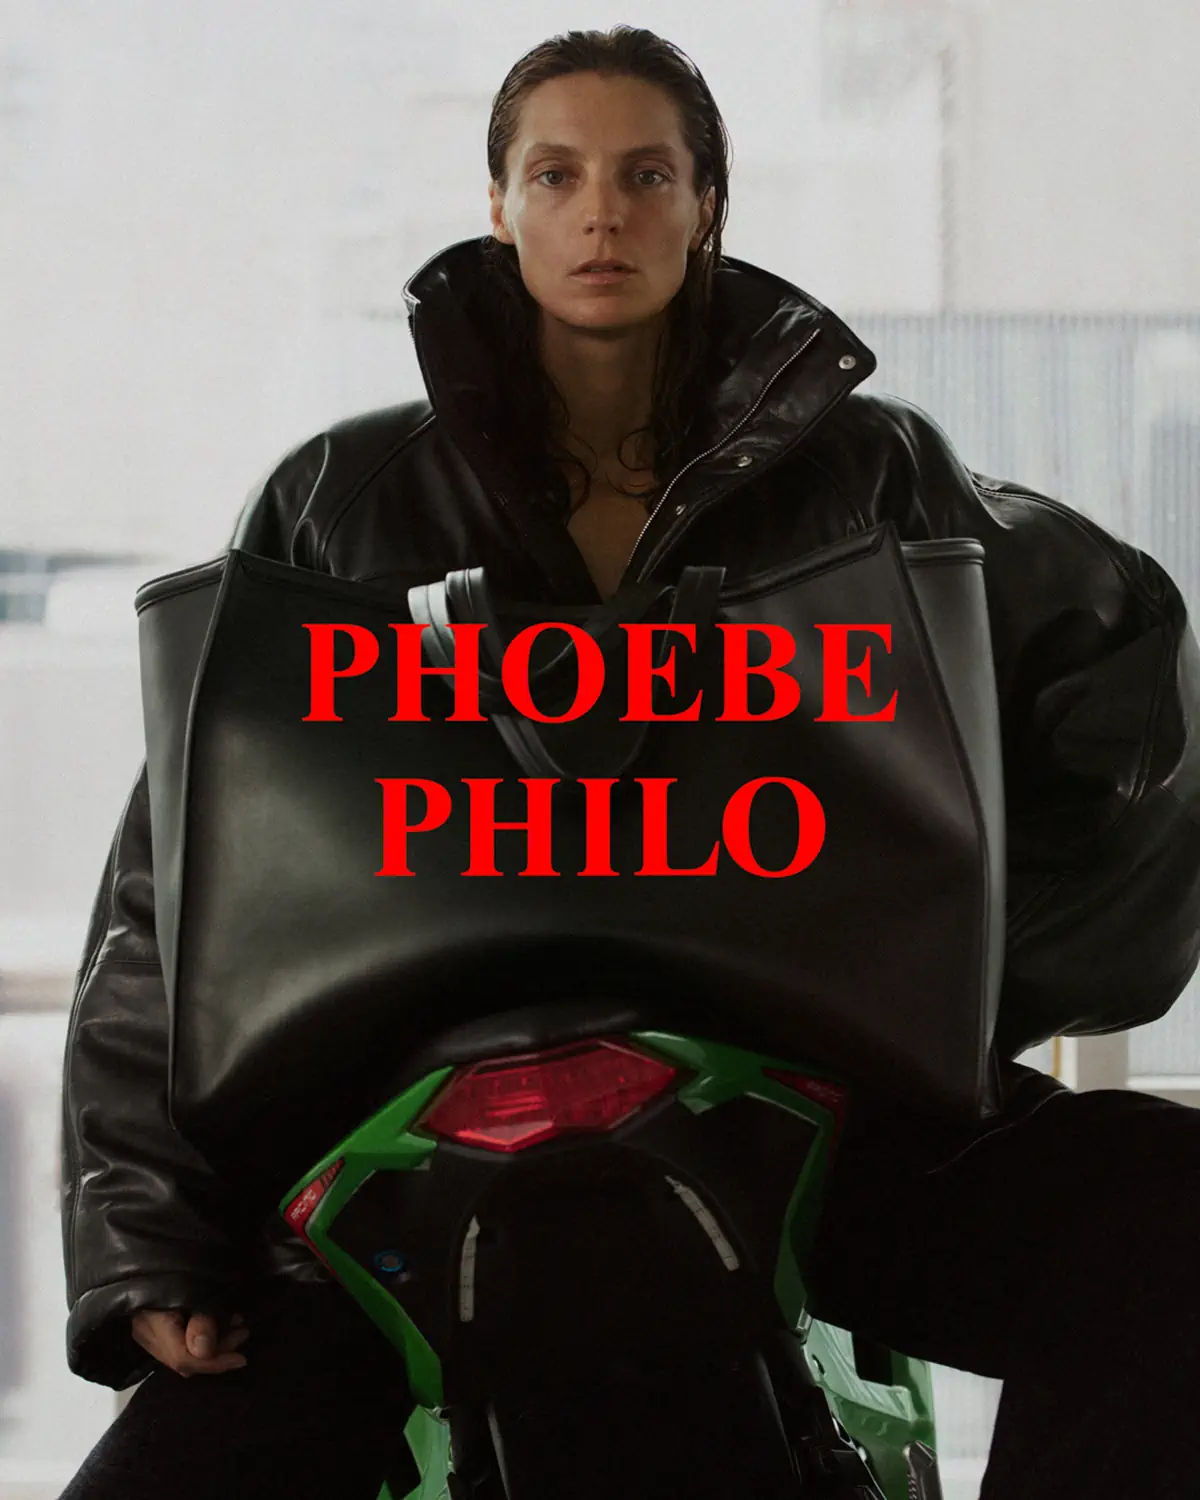 Phoebe Philo's new collection tends to sell out quickly